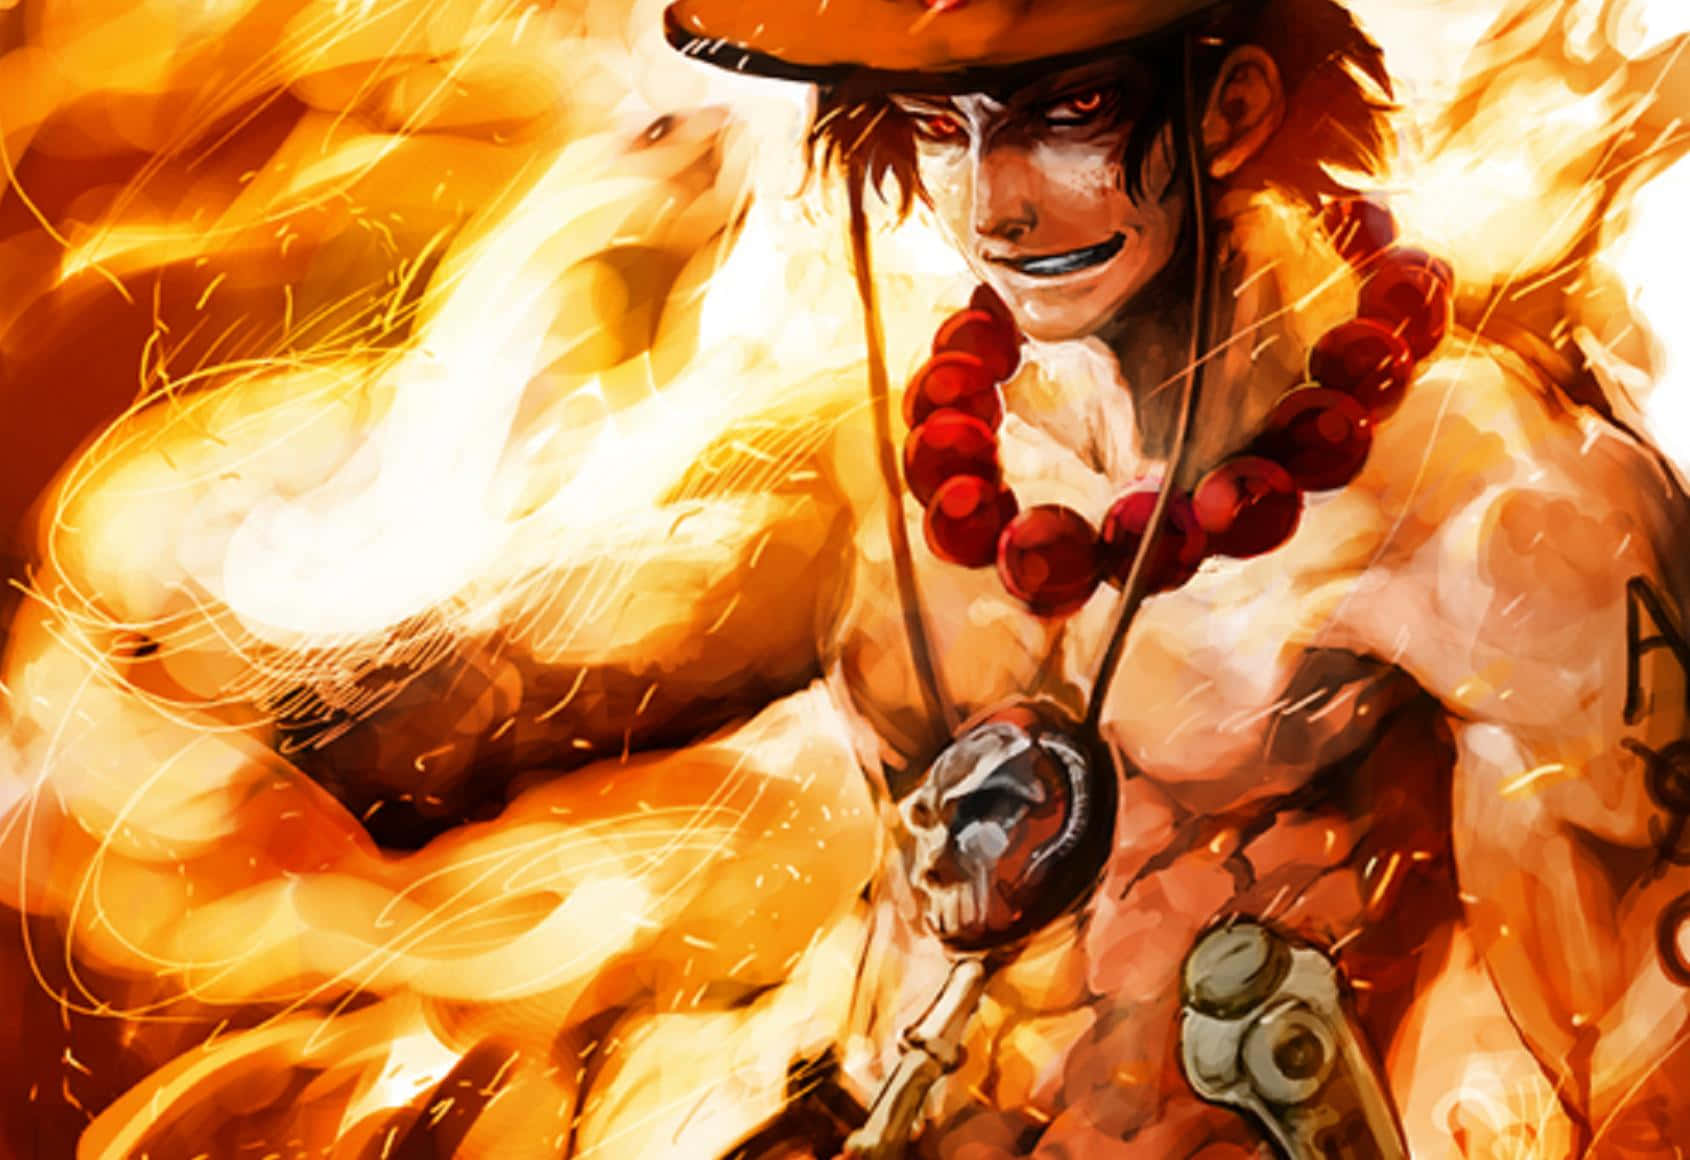 "Portgas D Ace ready to take on any challenge!" Wallpaper